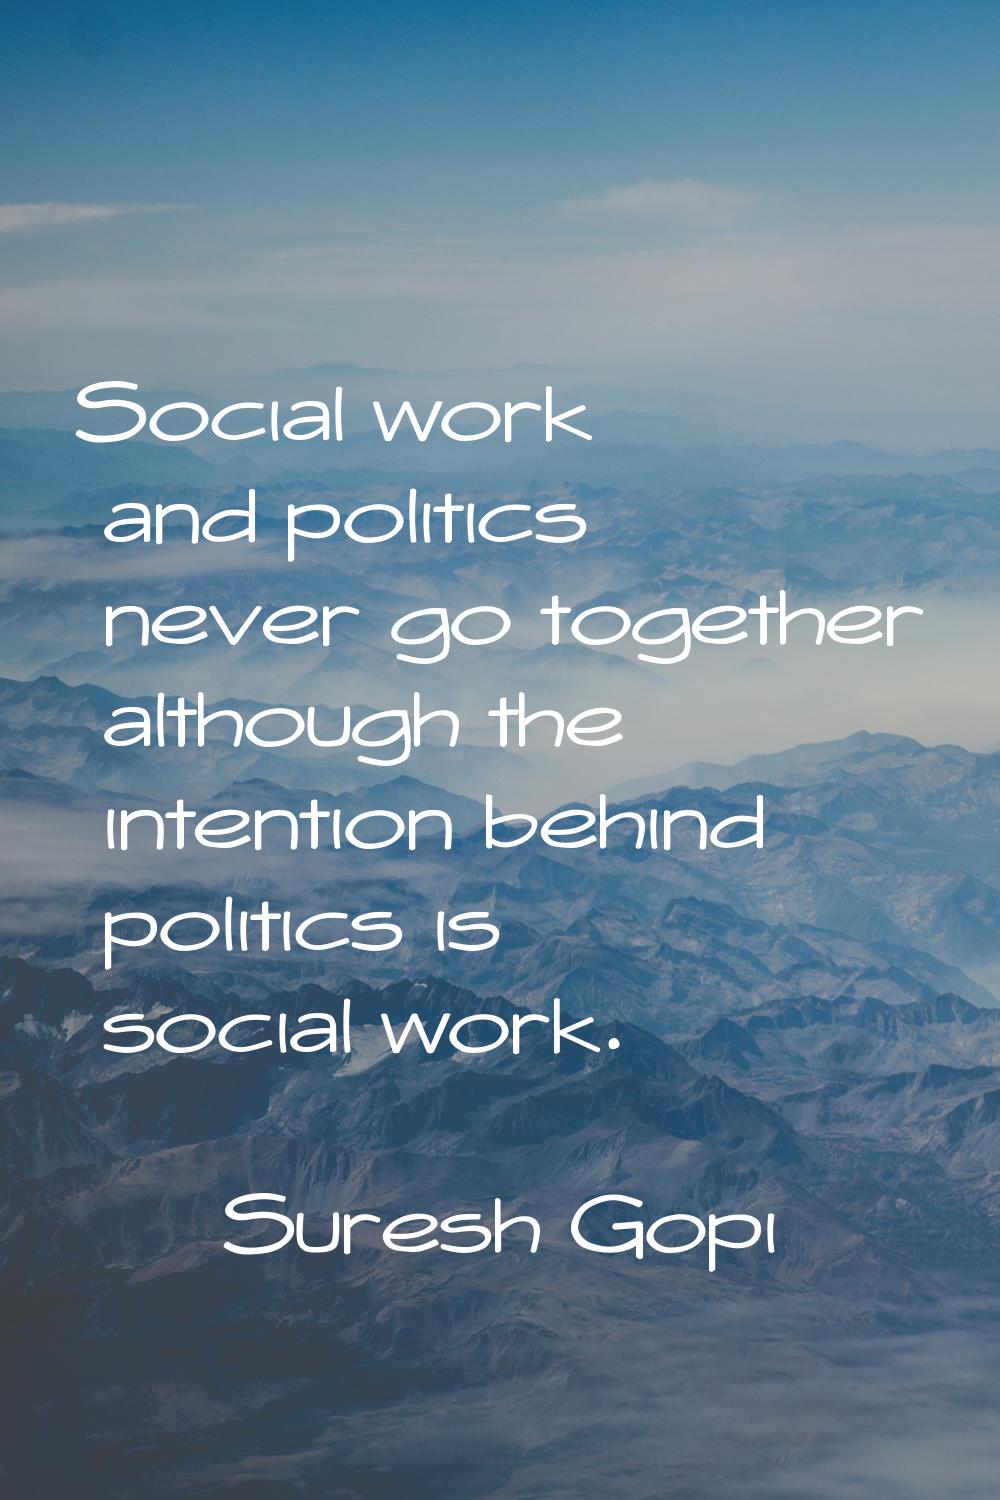 Social work and politics never go together although the intention behind politics is social work.